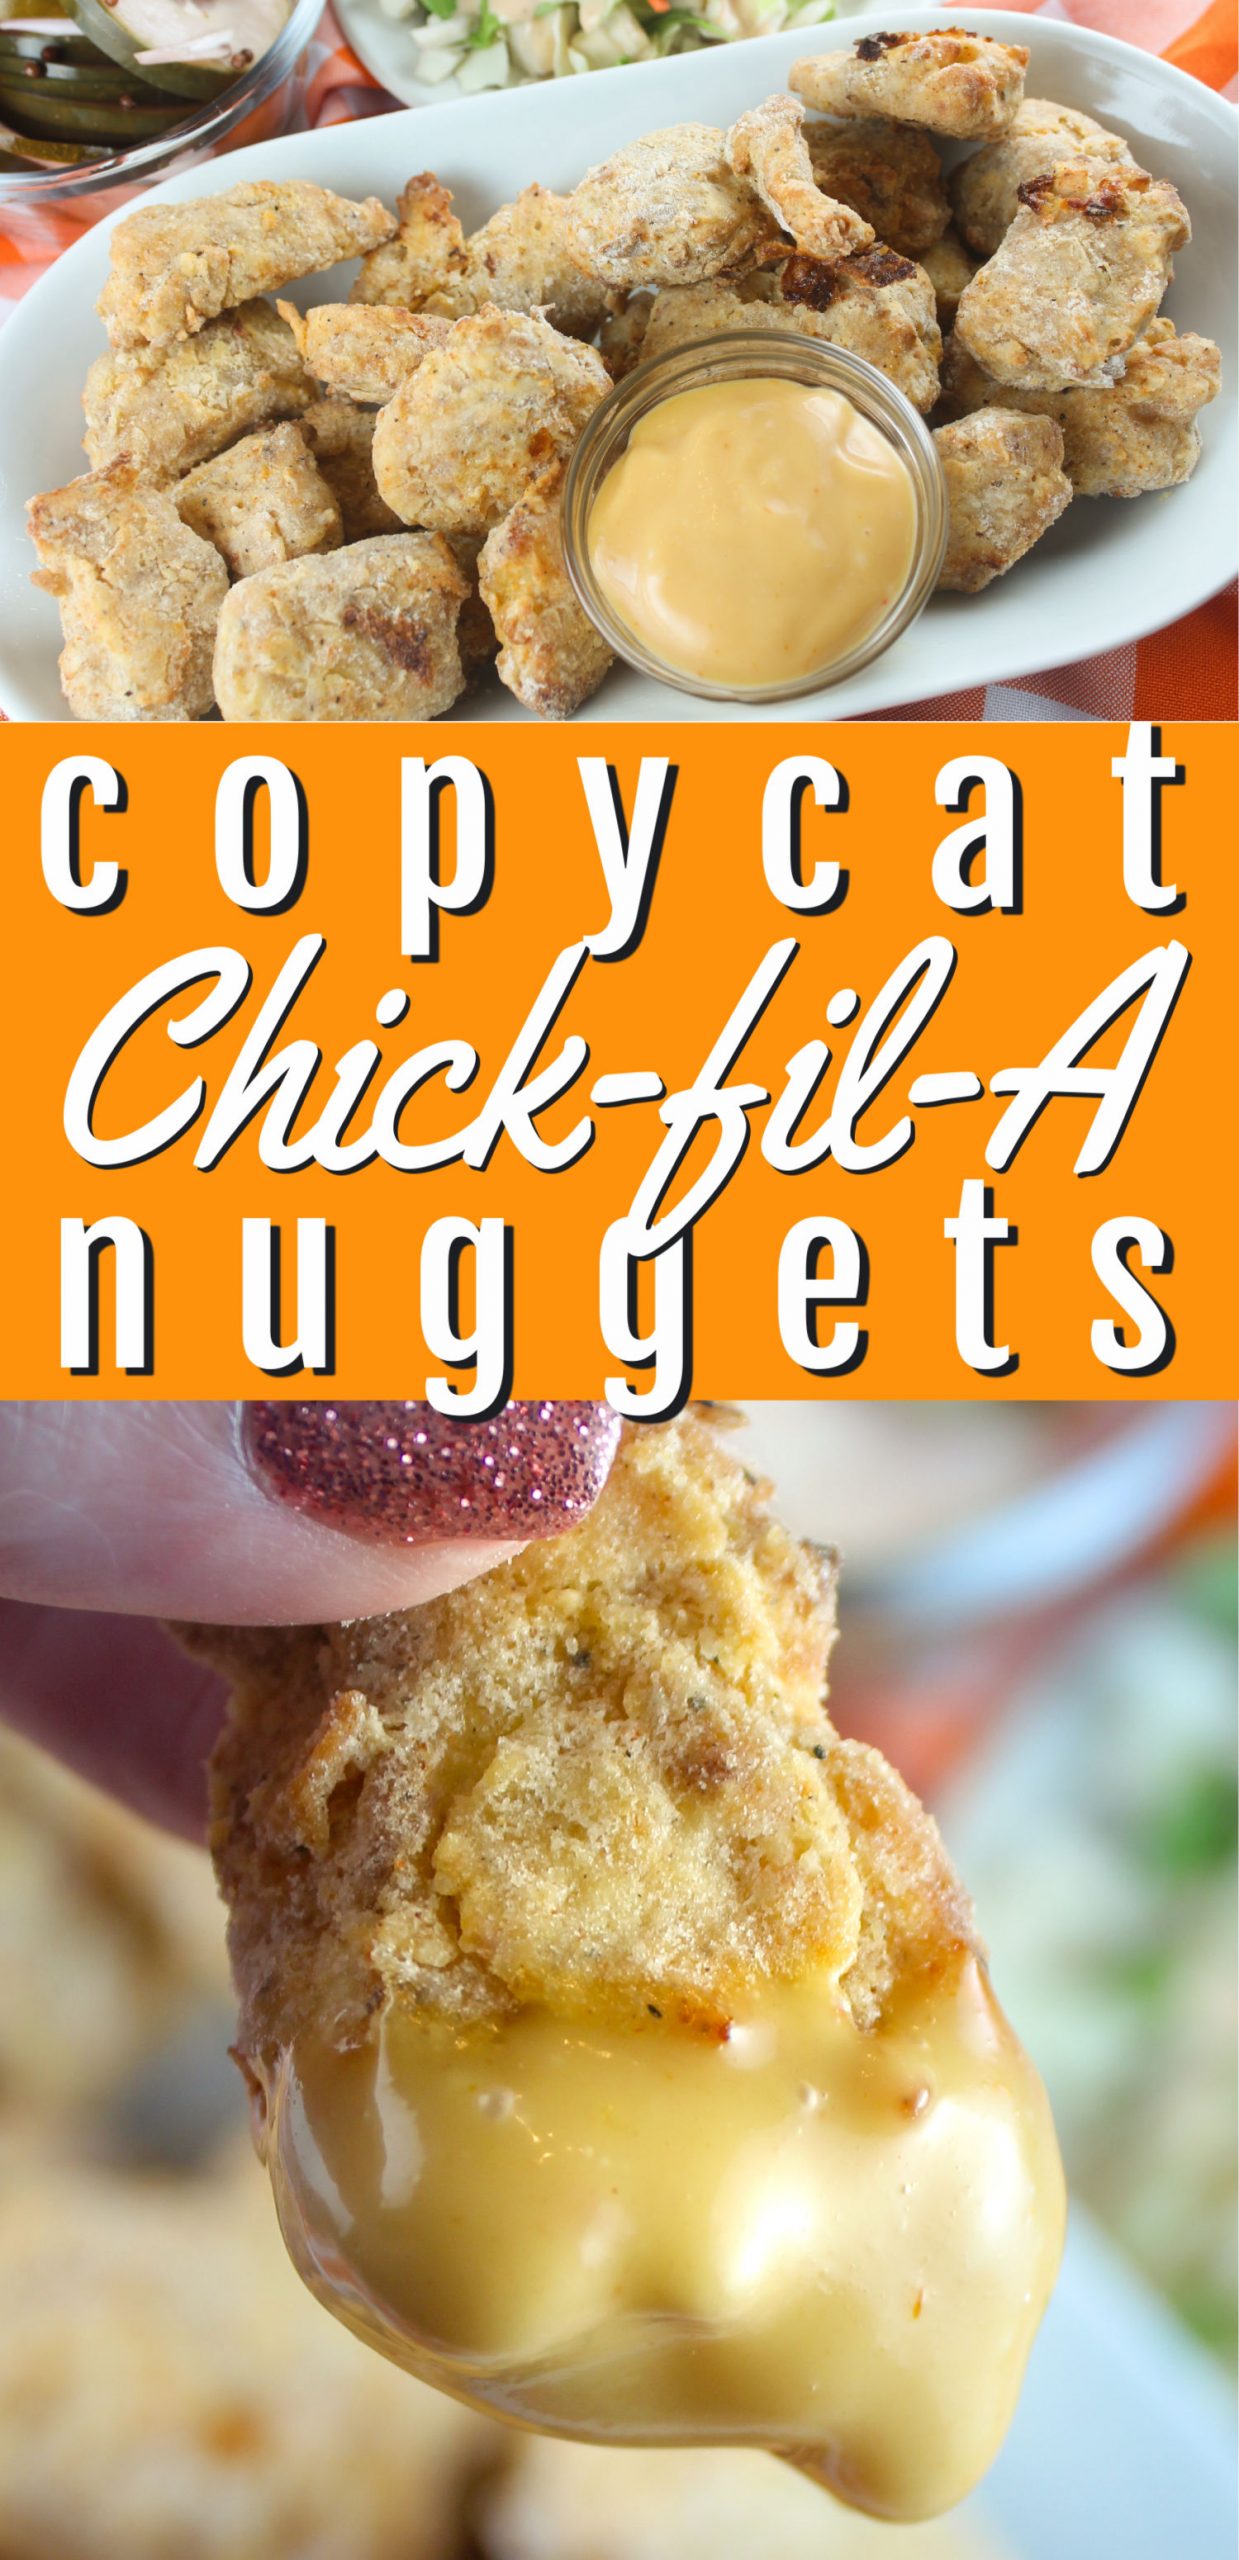 This Copycat Chick-fil-A Chicken Nugget recipe is right on track - crunchy and juicy - but healthier because it's made in the air fryer!  via @foodhussy